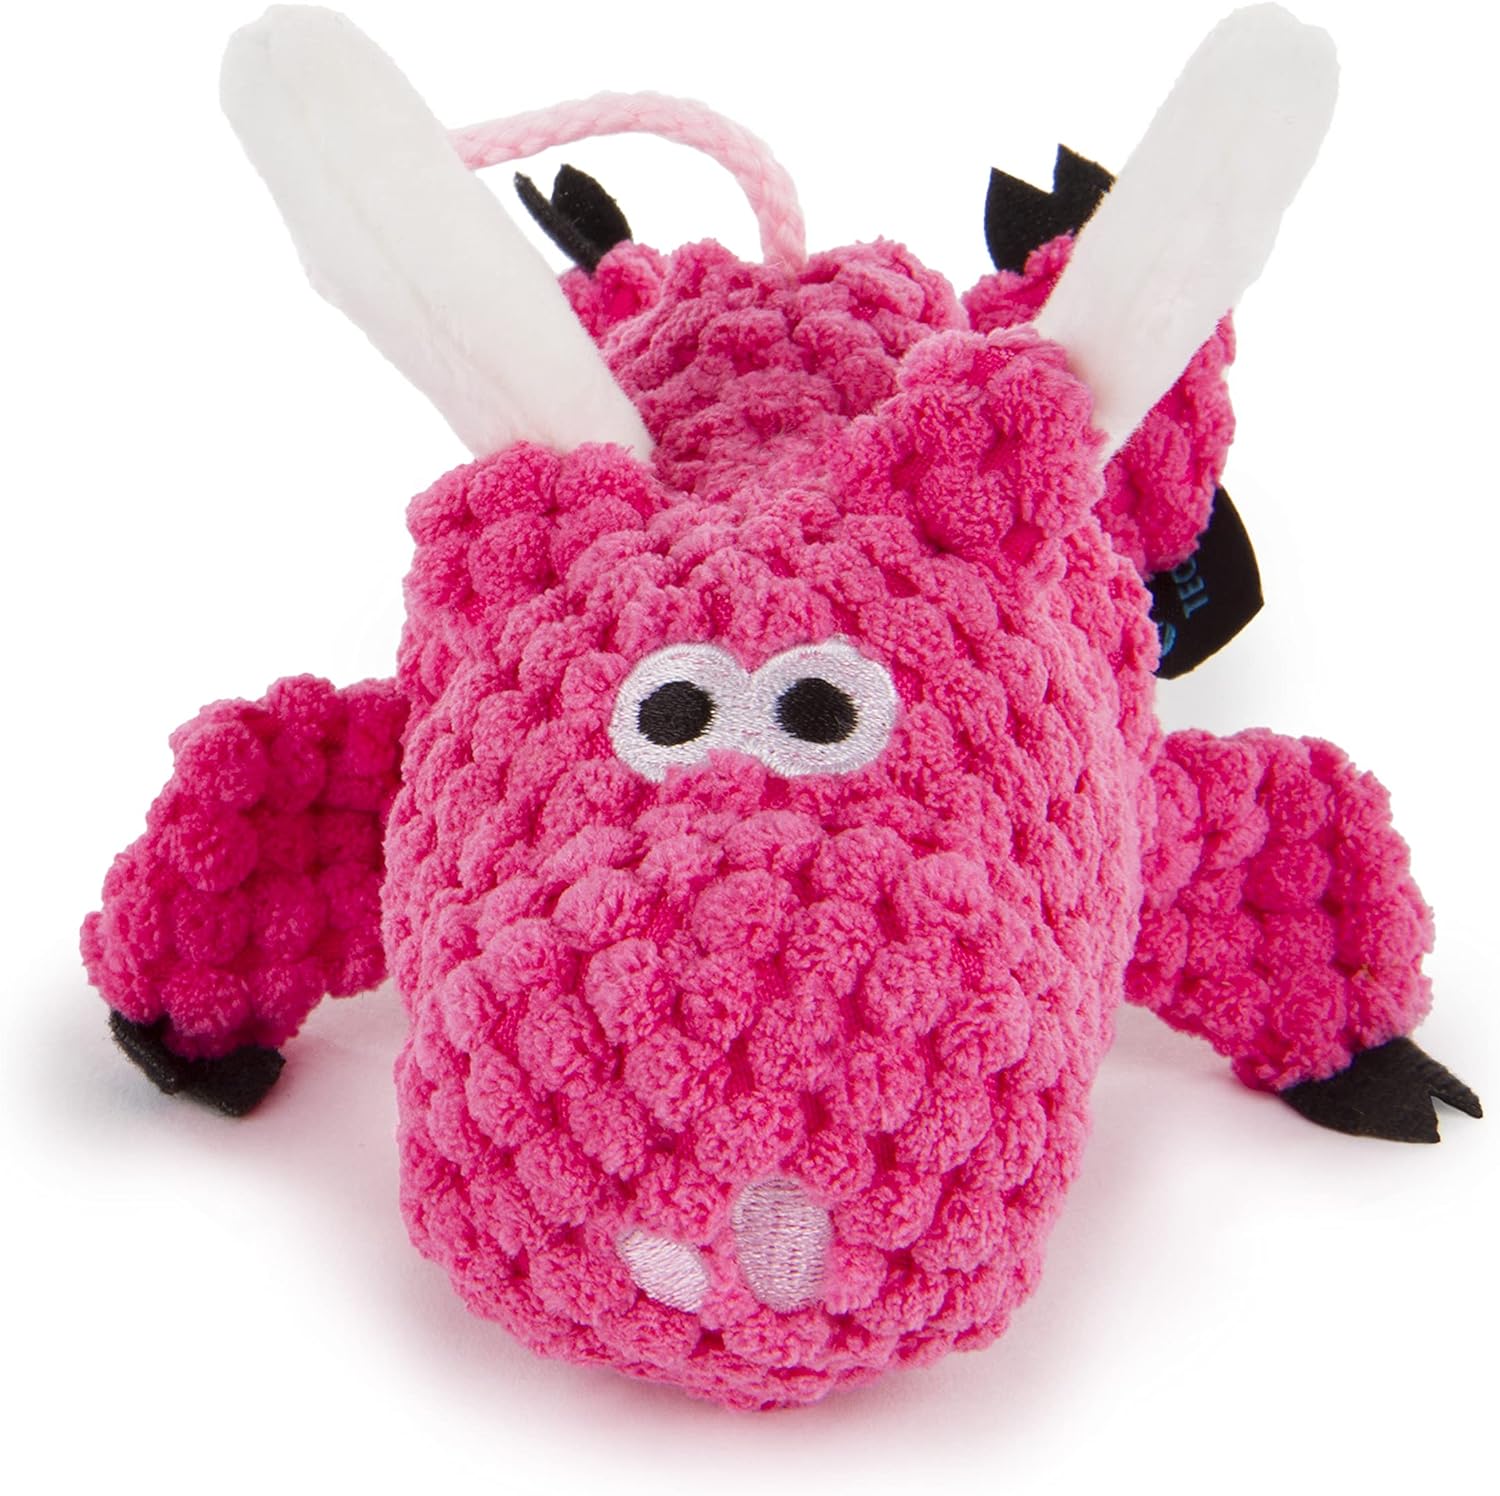 goDog Checkers Just for Me Flying Pig Squeaky Pluche Hondenspeelgoed - Roze